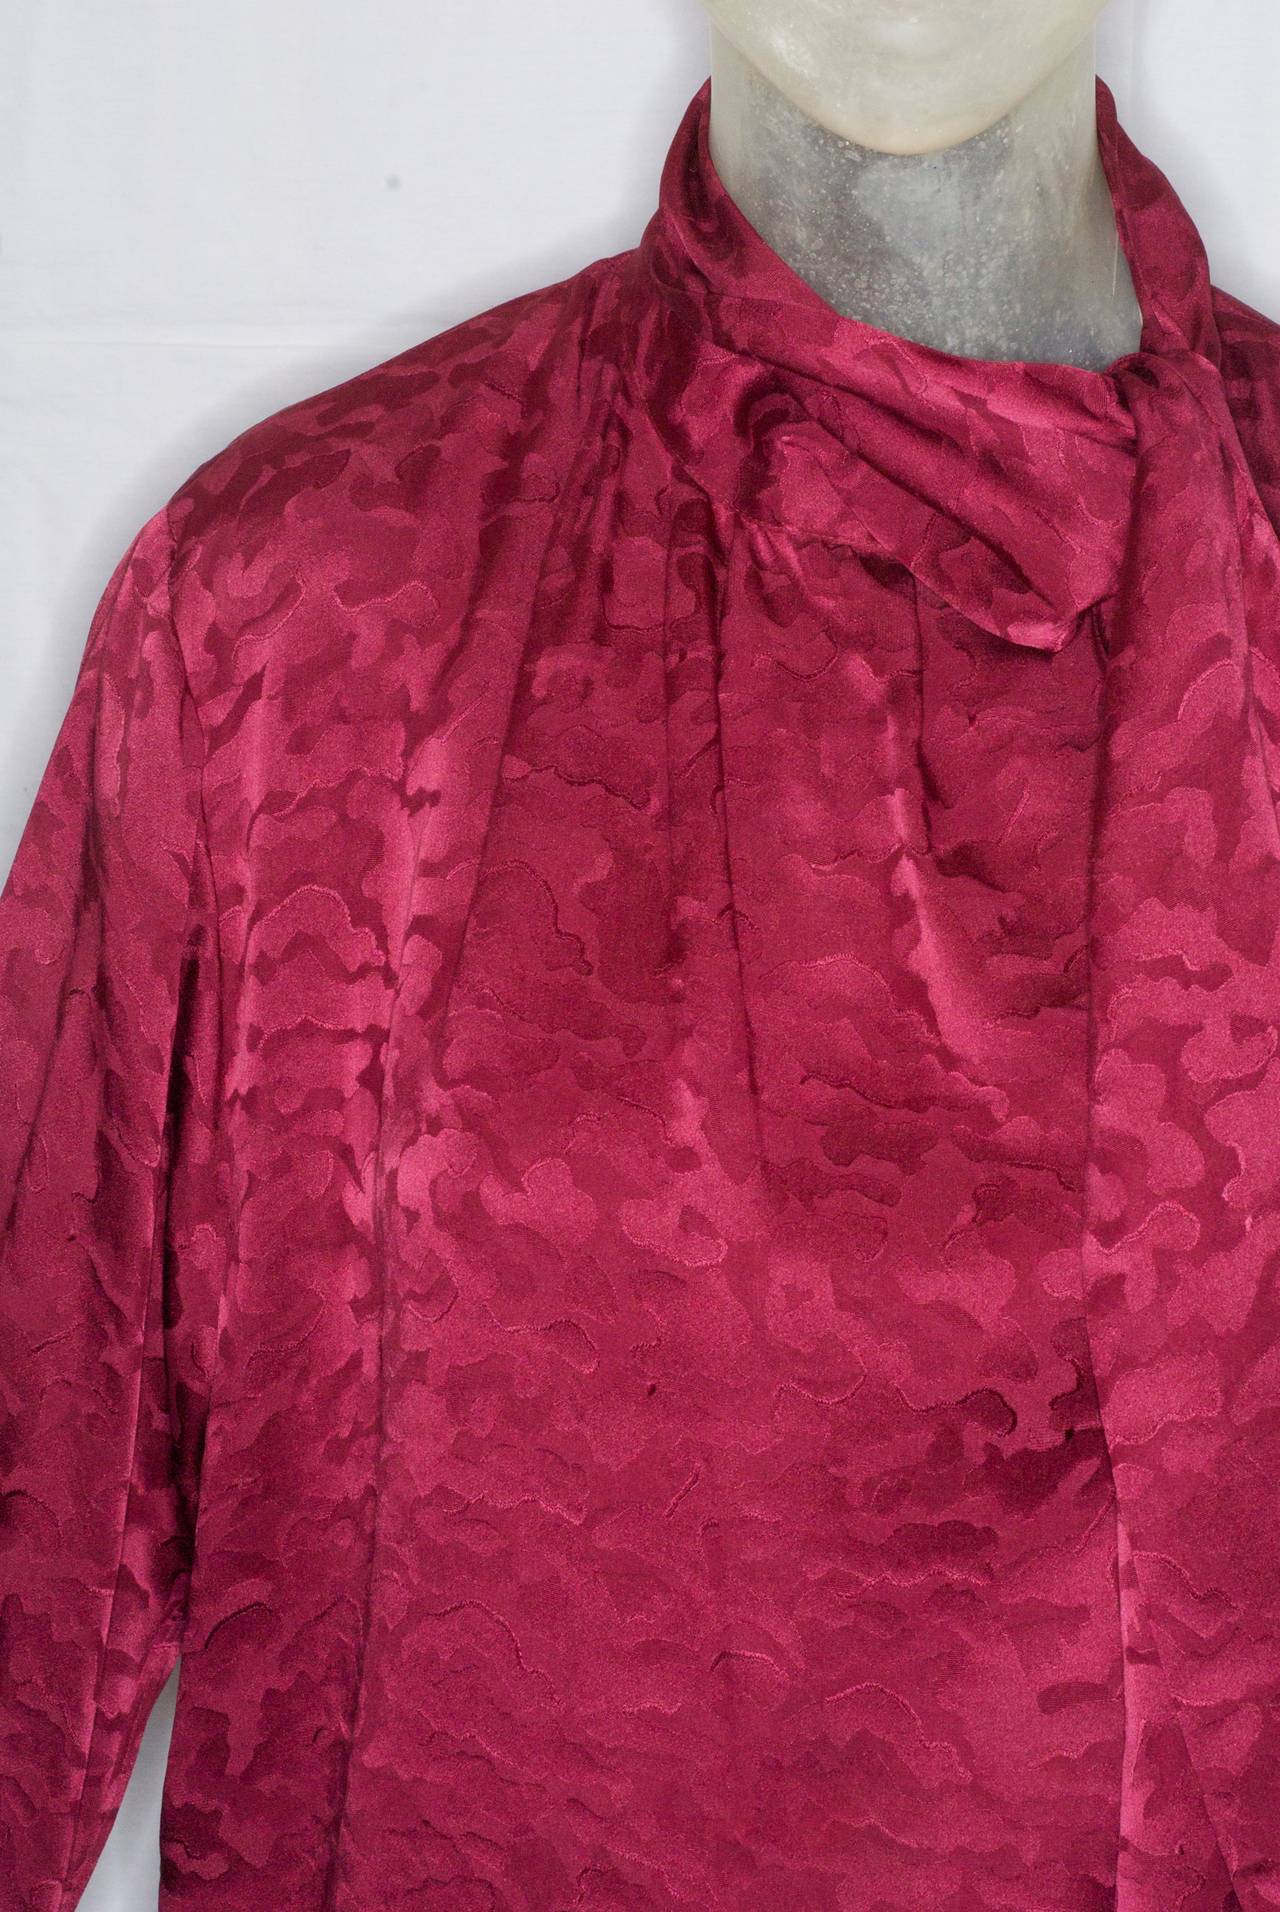 Yves Saint Laurent's silk blouse in a burgundy leopard print is a timeless classic.

Size 42.

Excellent condition.